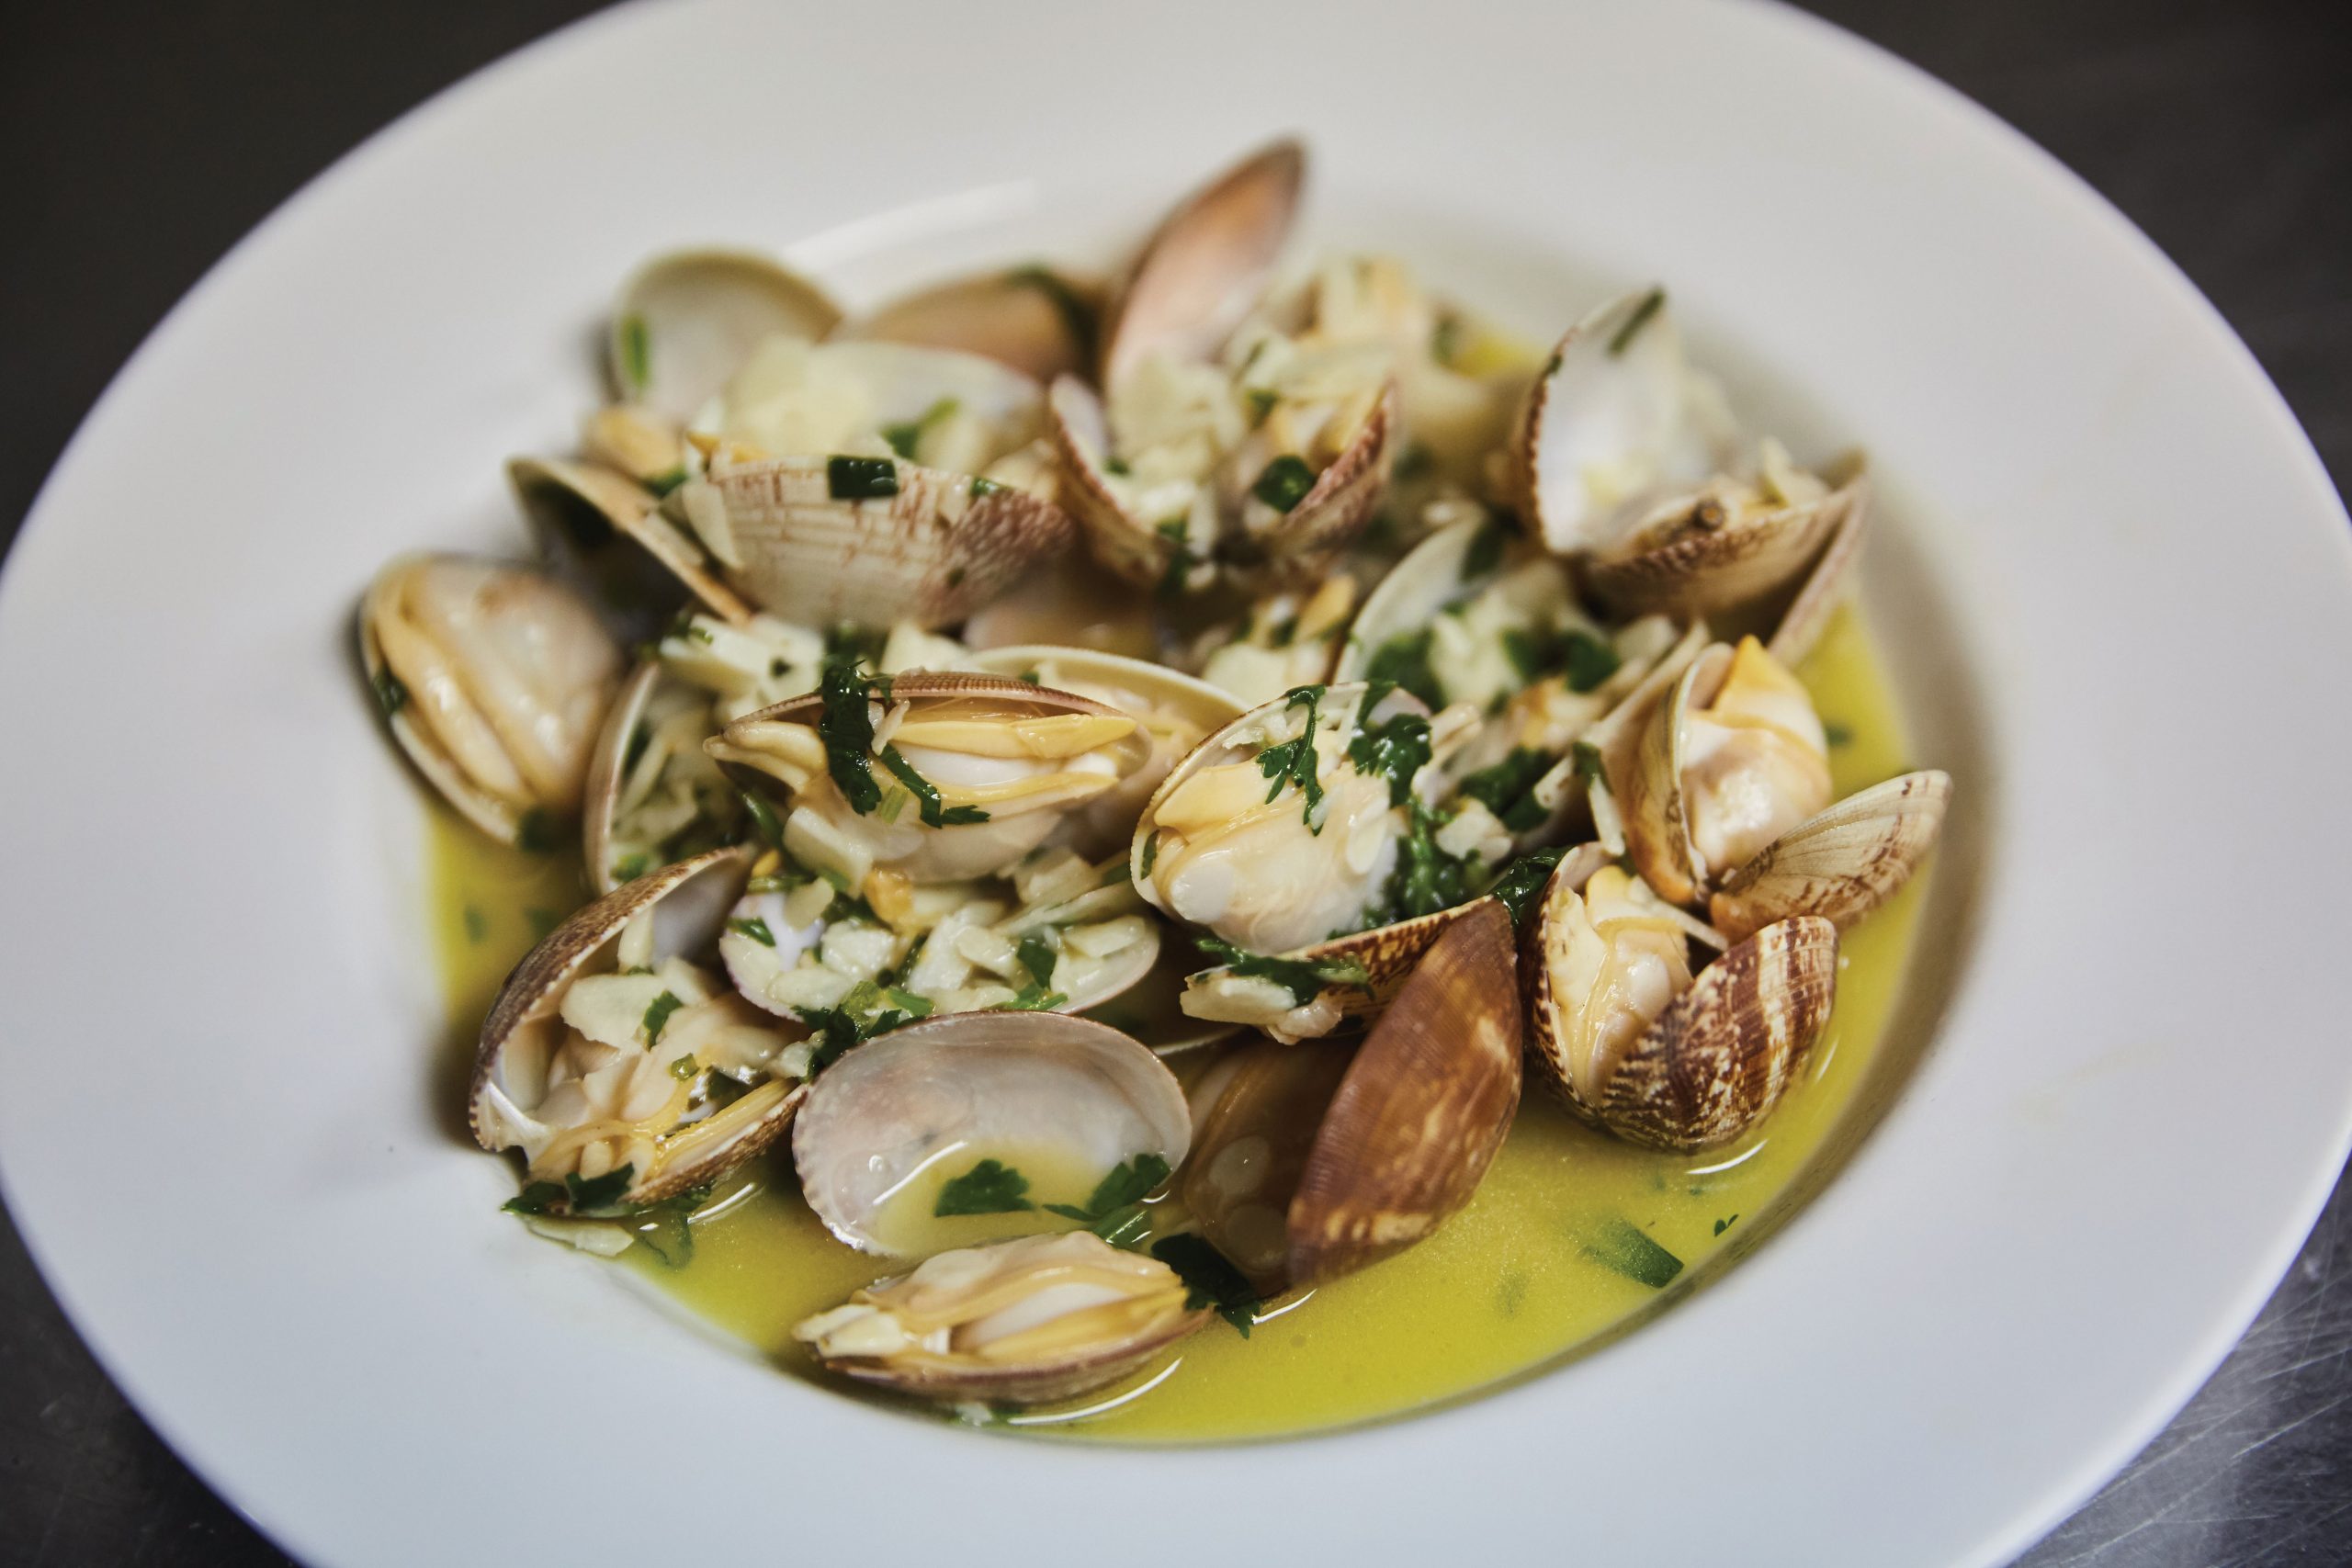 The club’s version of clams with lemon and garlic in ‘bulhão pato’ sauce, which uses fresh coriander as a main ingredient - Photo by António Sanmarful